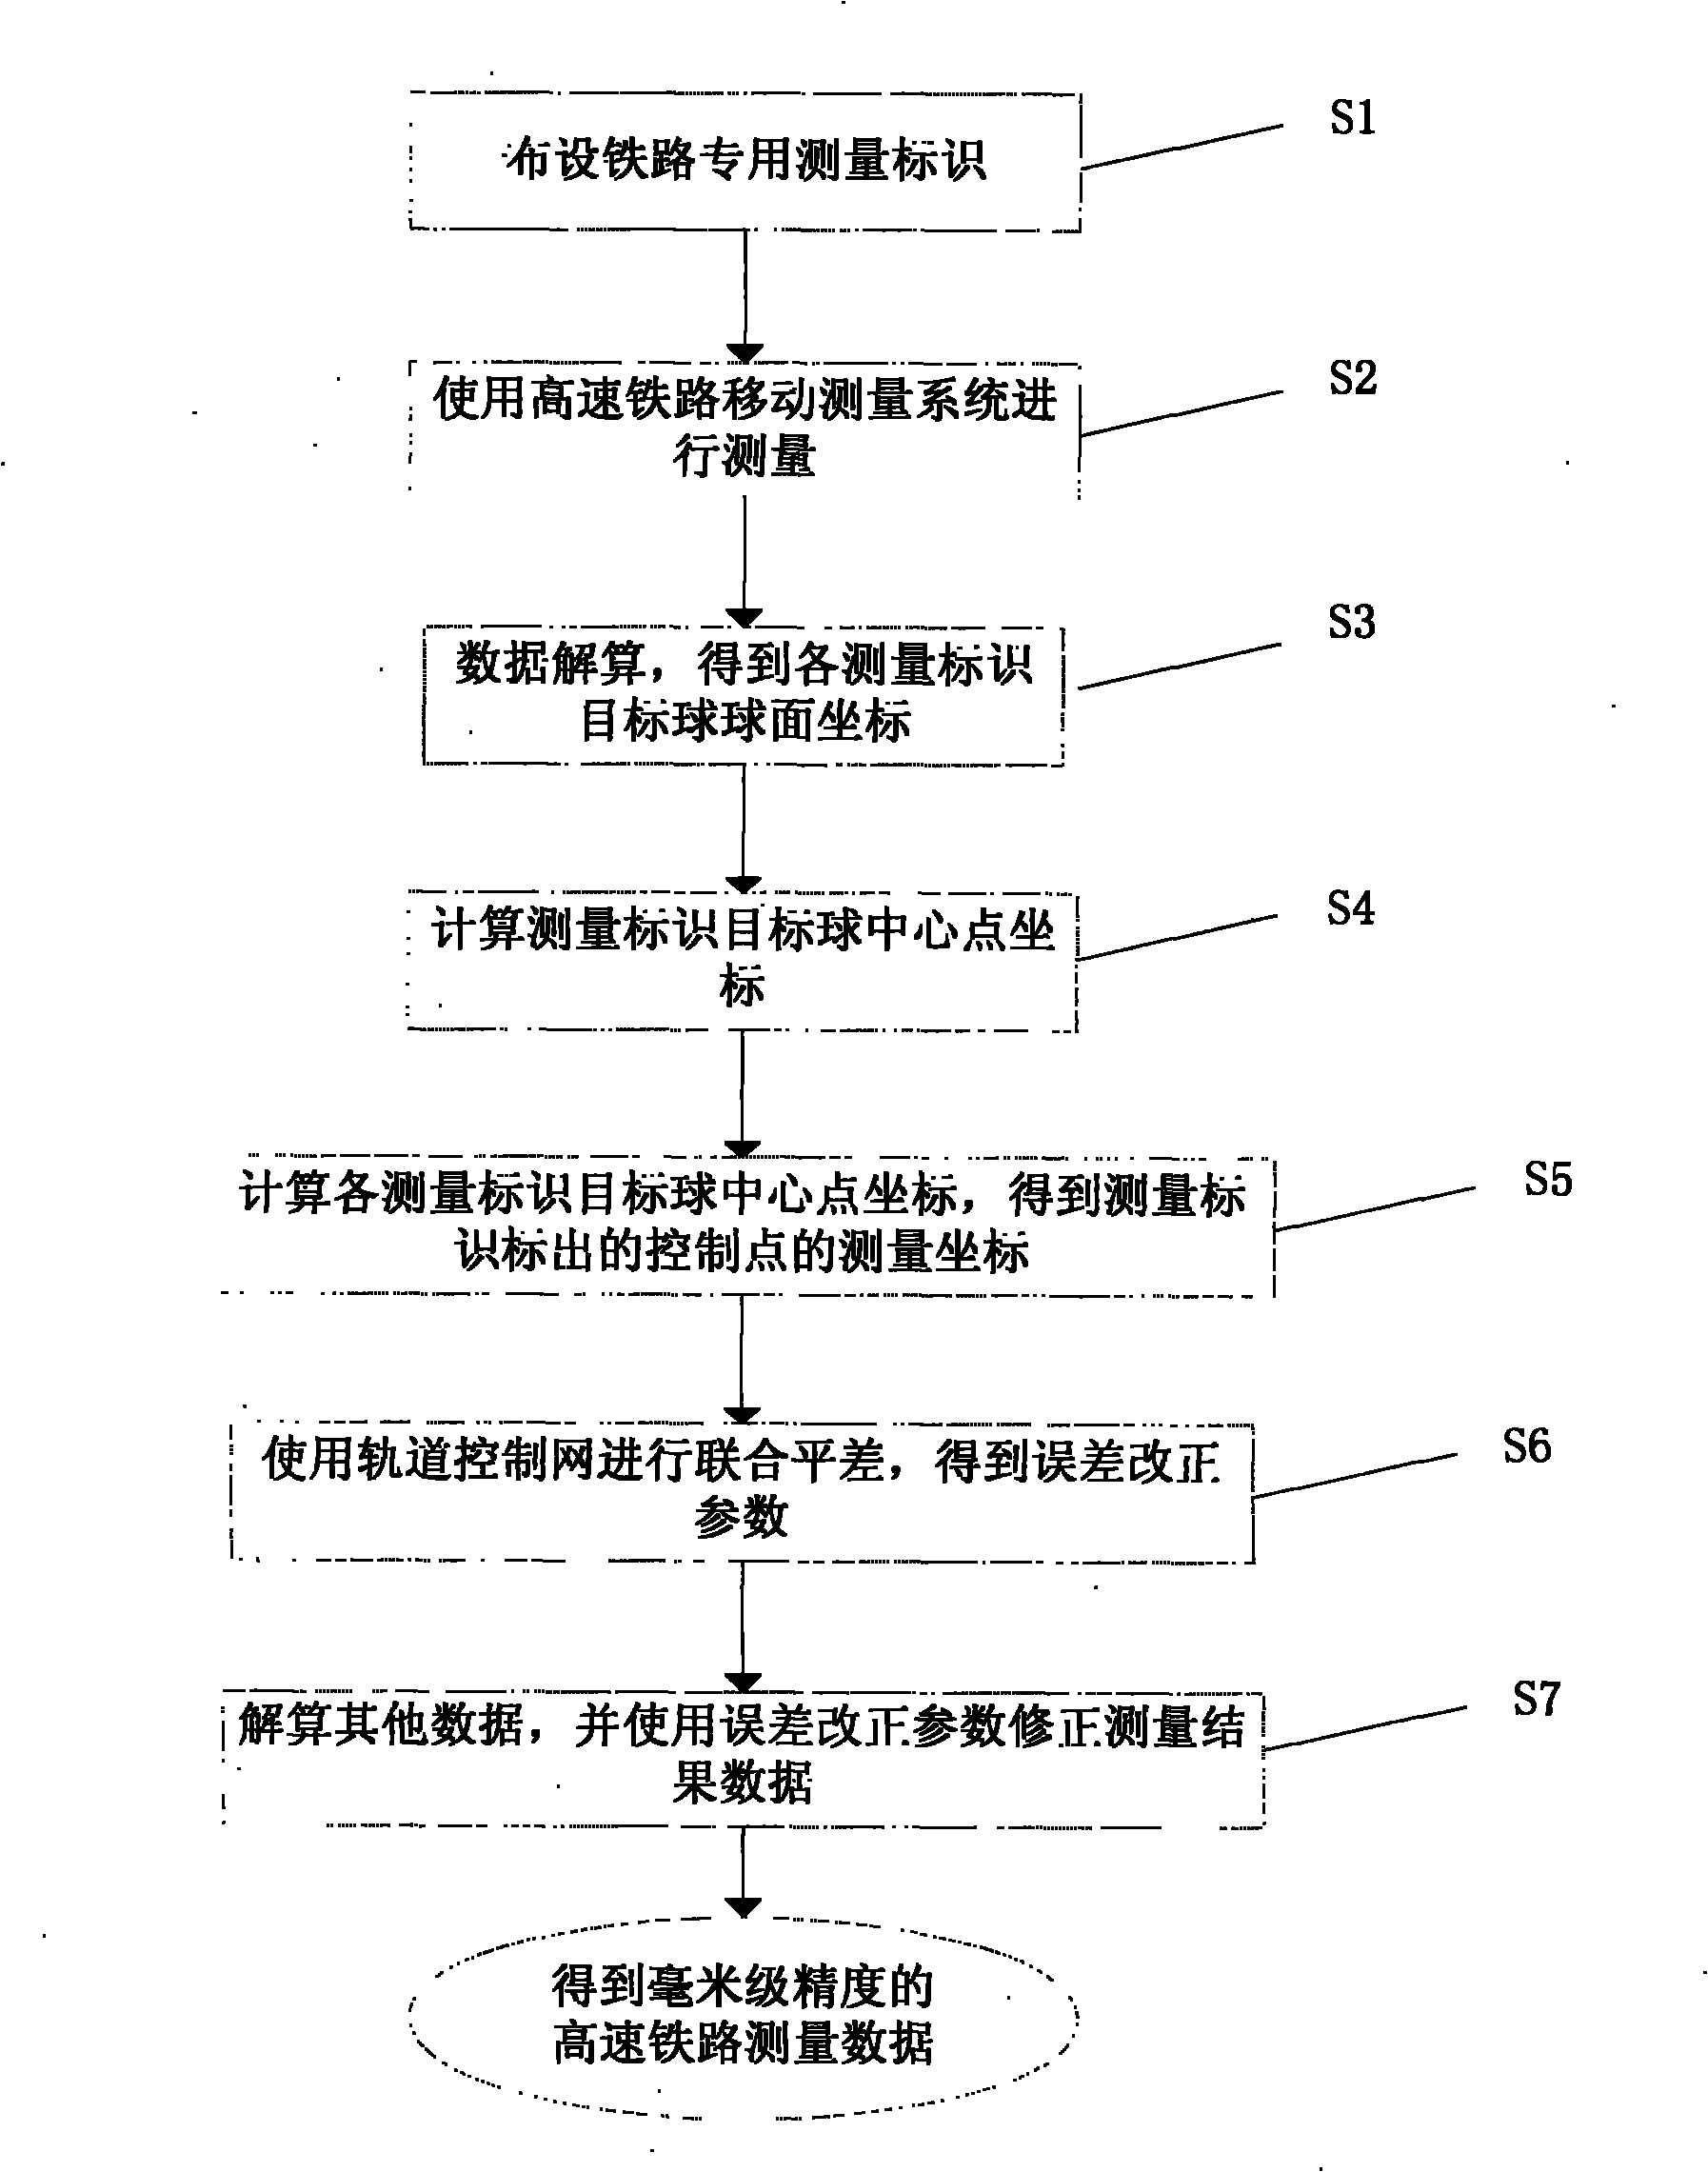 System and method for fast precise measurement and total factor data acquisition of high speed railway